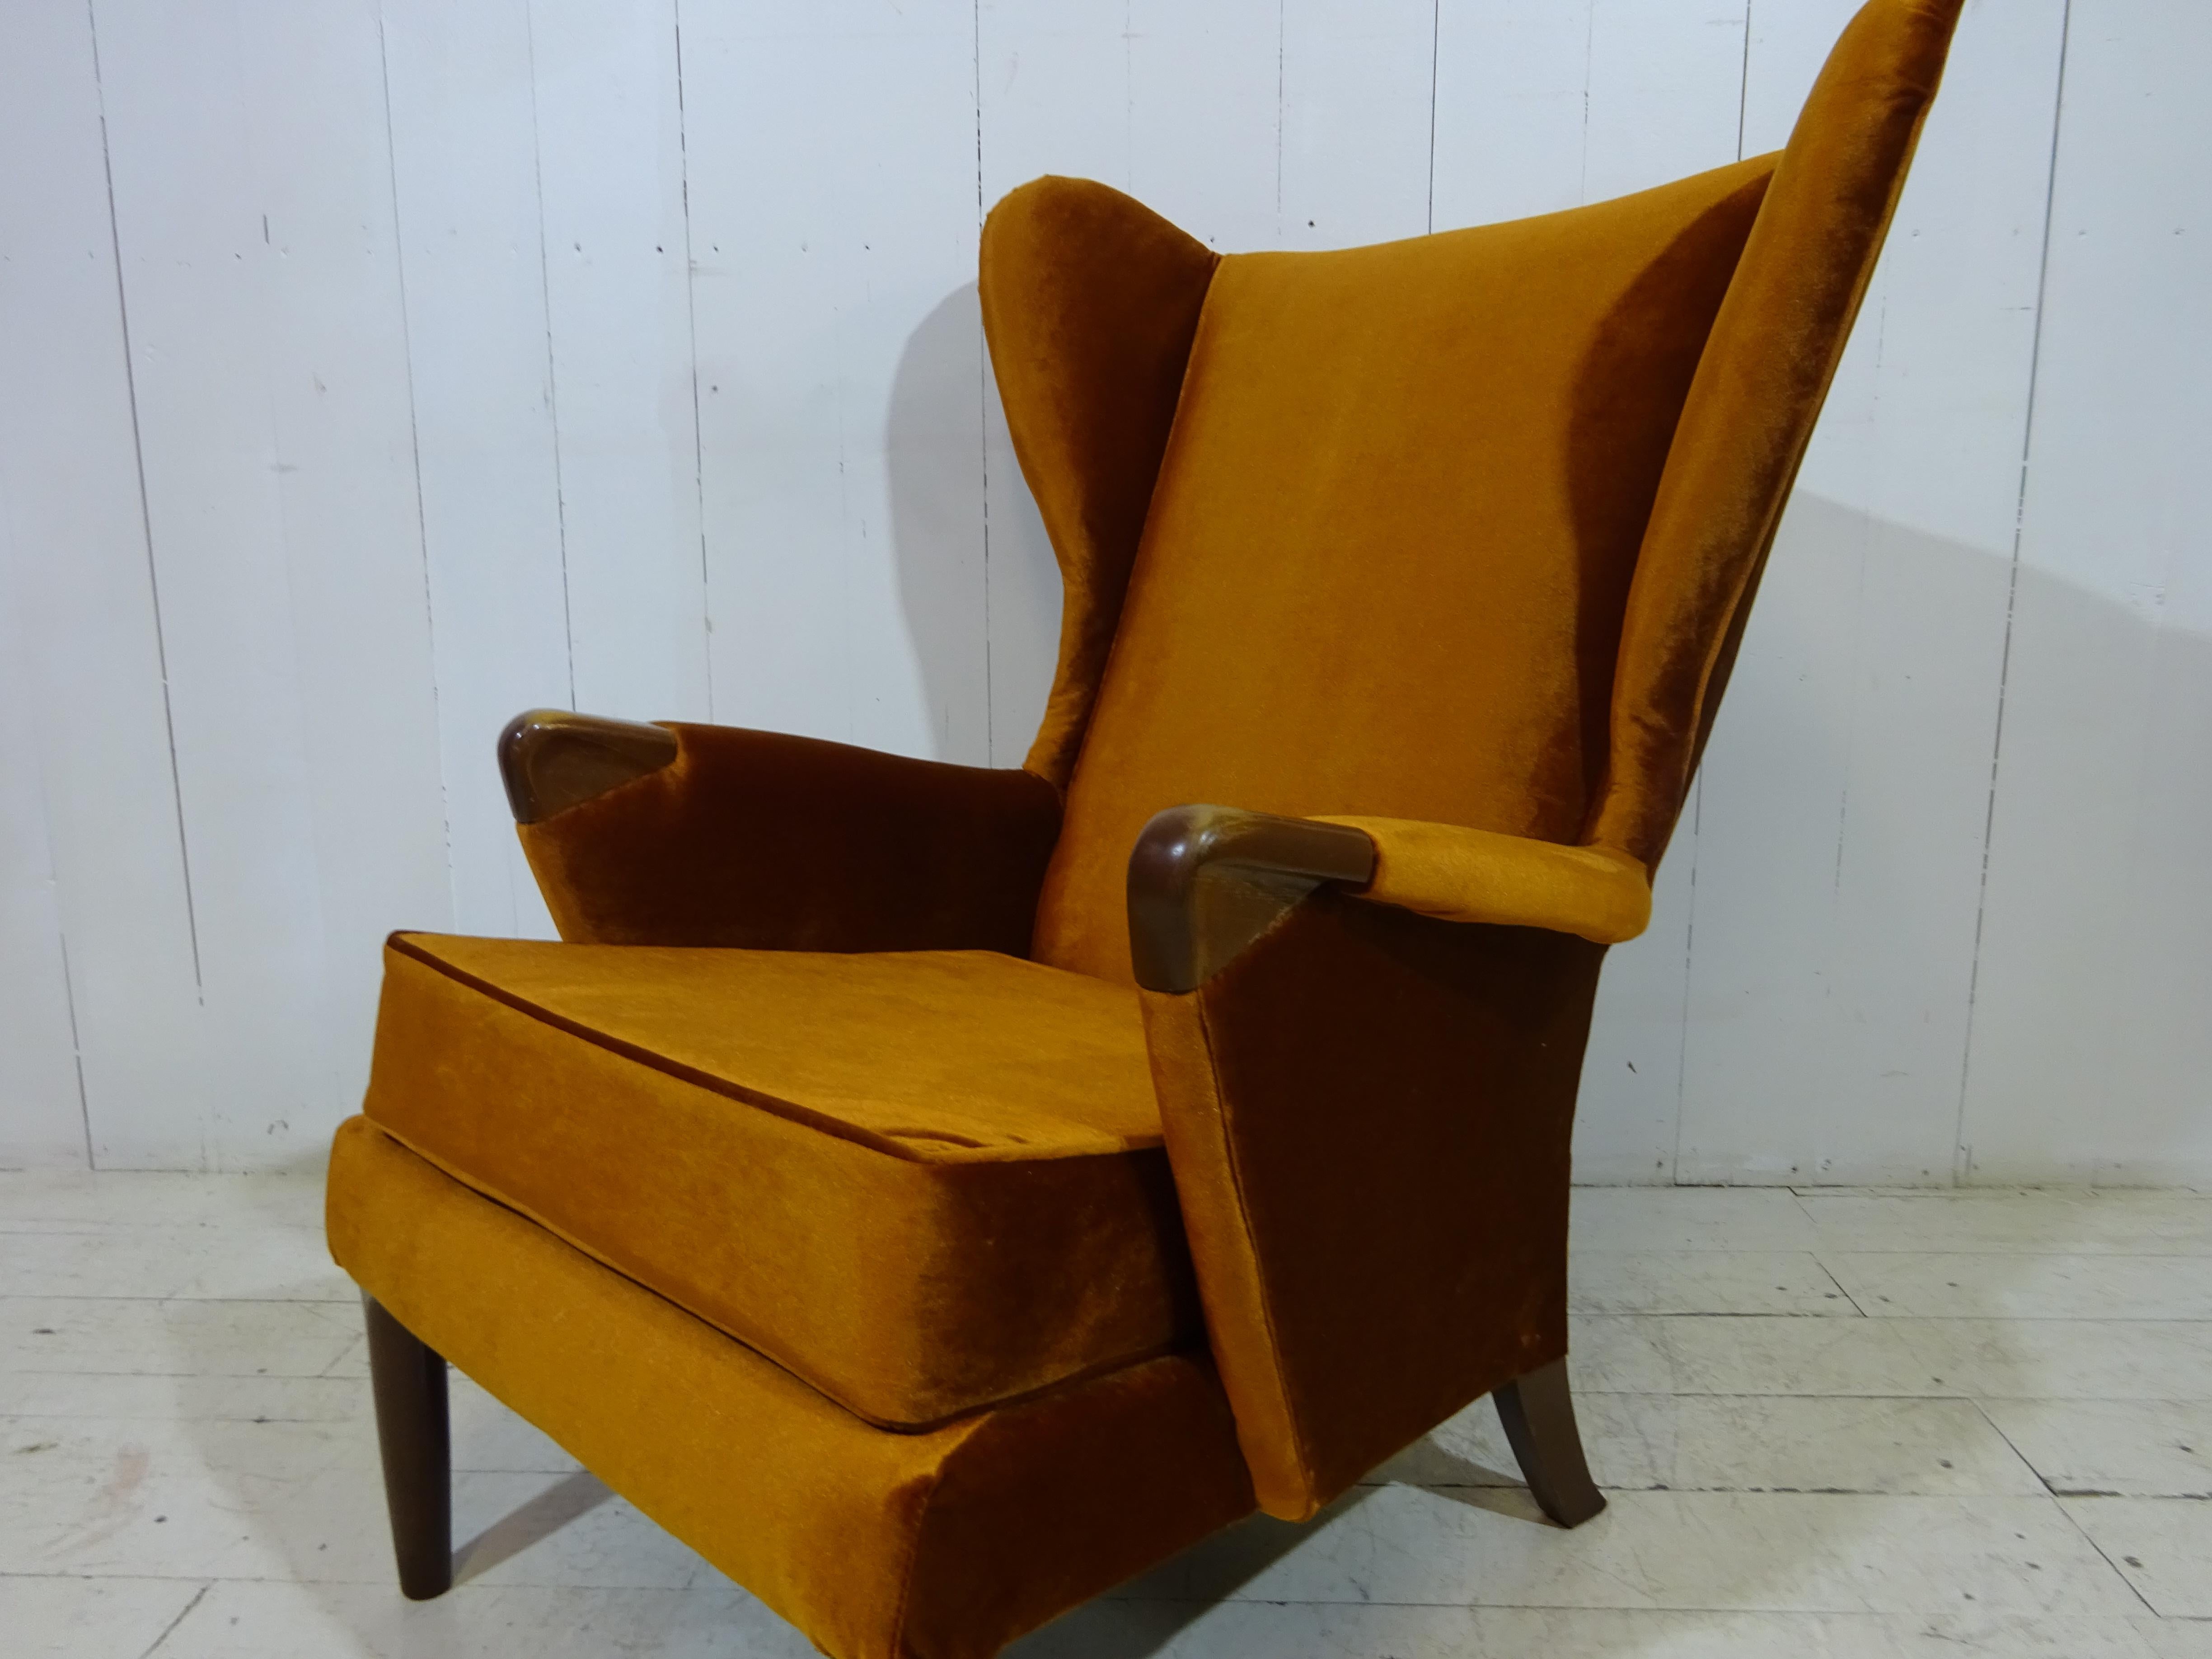 Parker Knoll wing back.

A fantastic find by the team at The Rare Chair Company. 

Parker Knoll was launched at the British Industries Fair in 1931 and was the first company to use the new spring system, setting new standards for comfort in